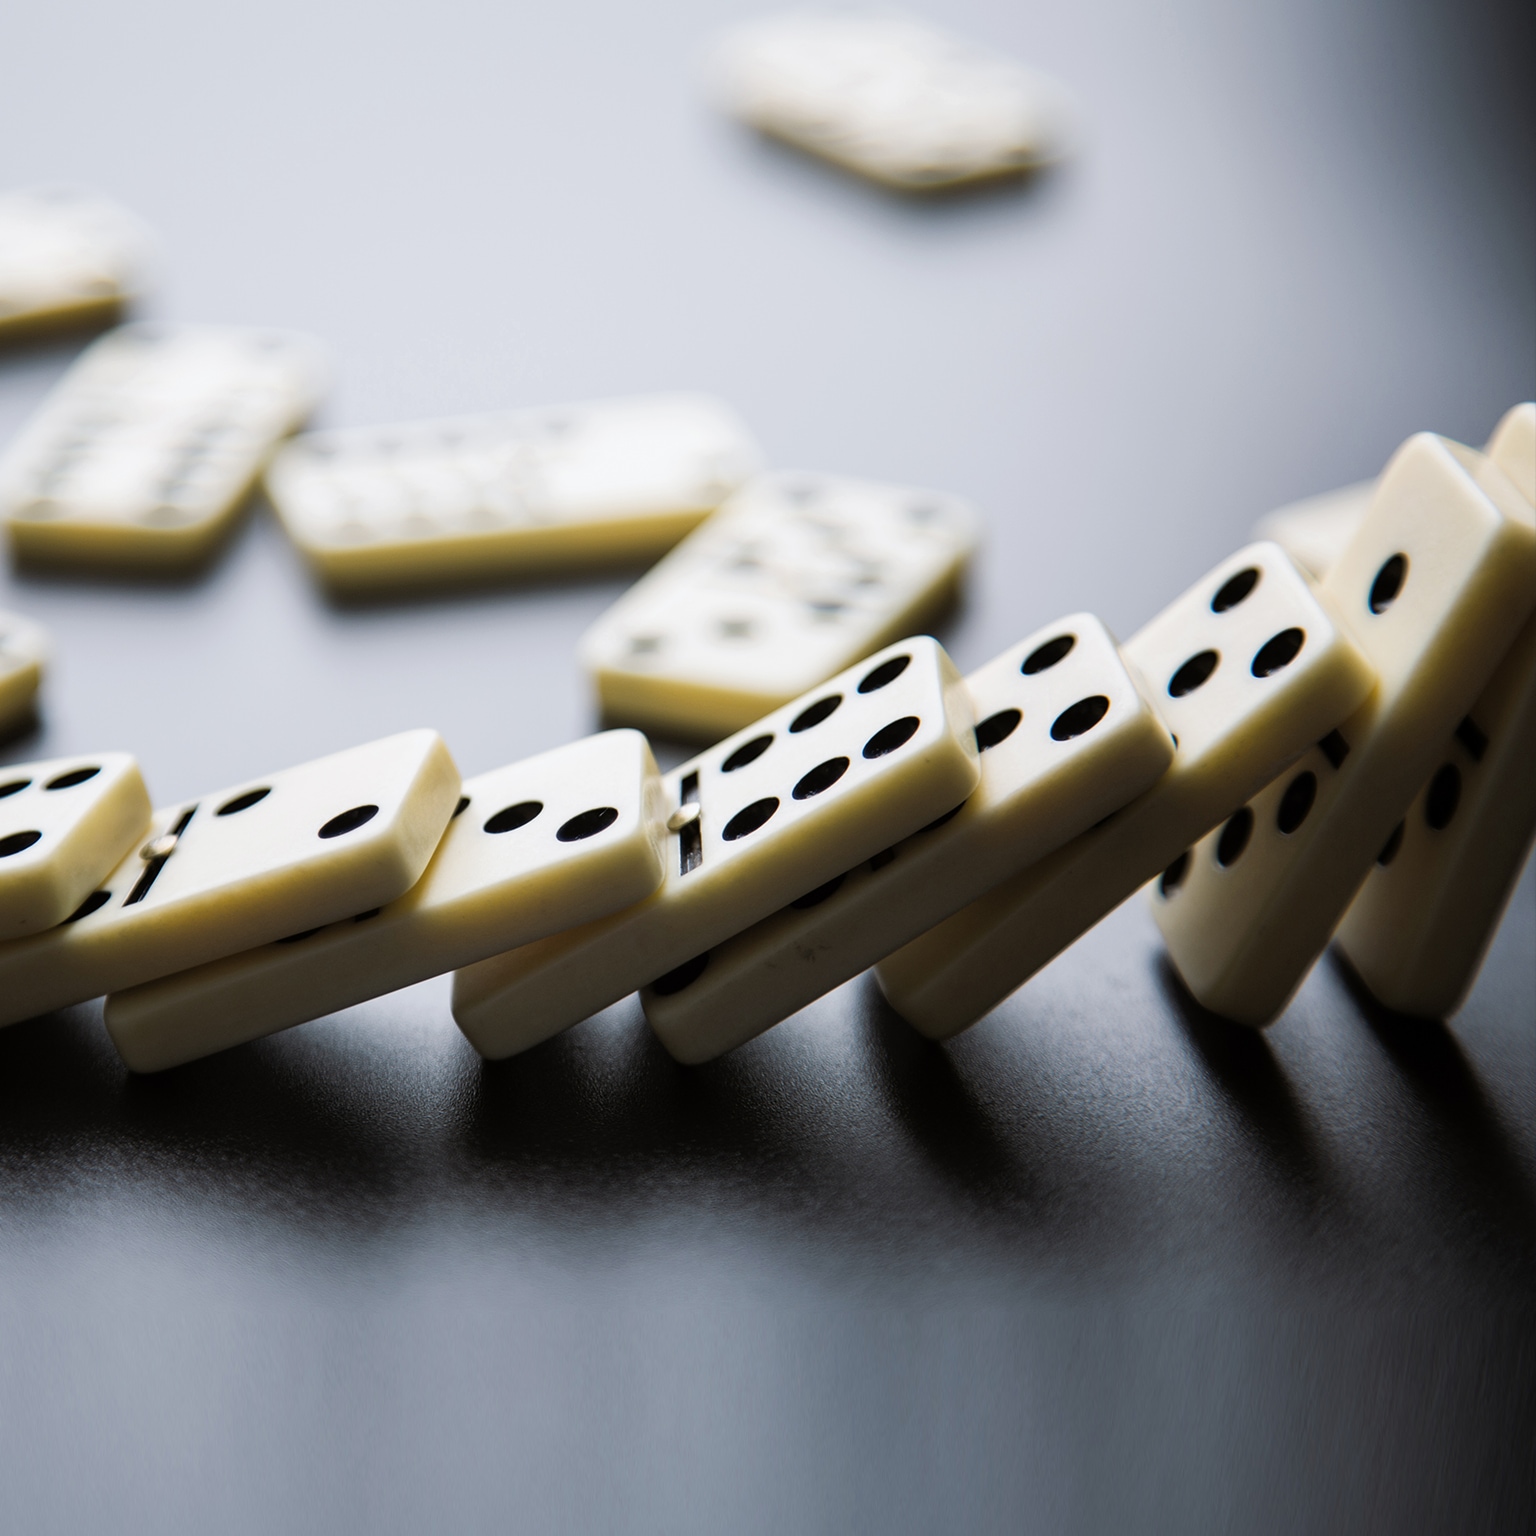 domino-effect-sales-leaders-reinvent-go-to-market-strategy-mckinsey